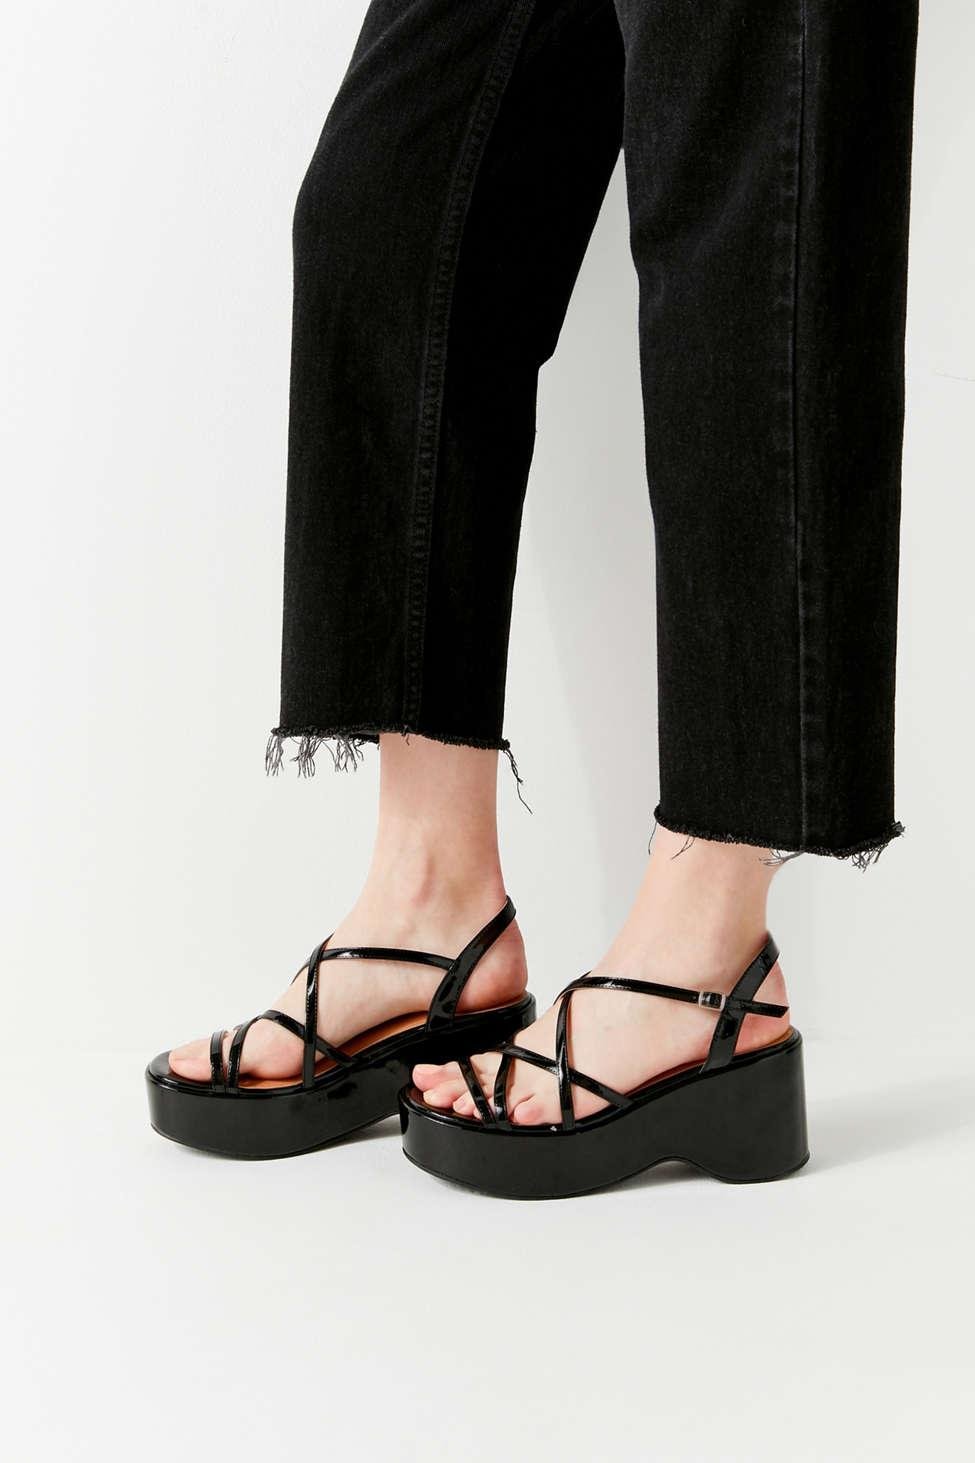 Urban Outfitters Uo Lizzy Strappy Platform Sandal in Black | Lyst